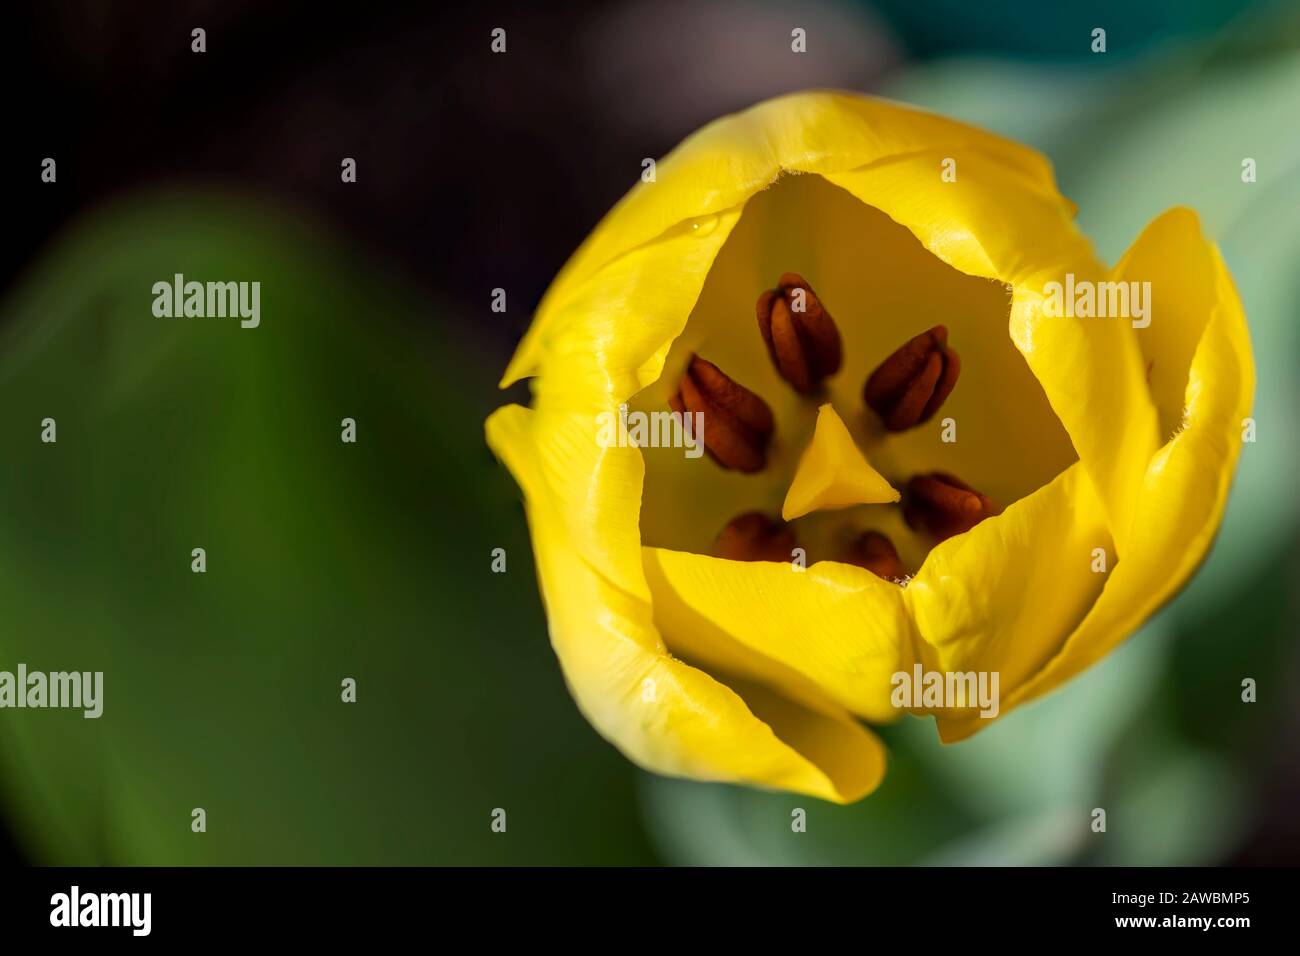 Top view of yellow tulip flower close up on a blurred background Stock Photo